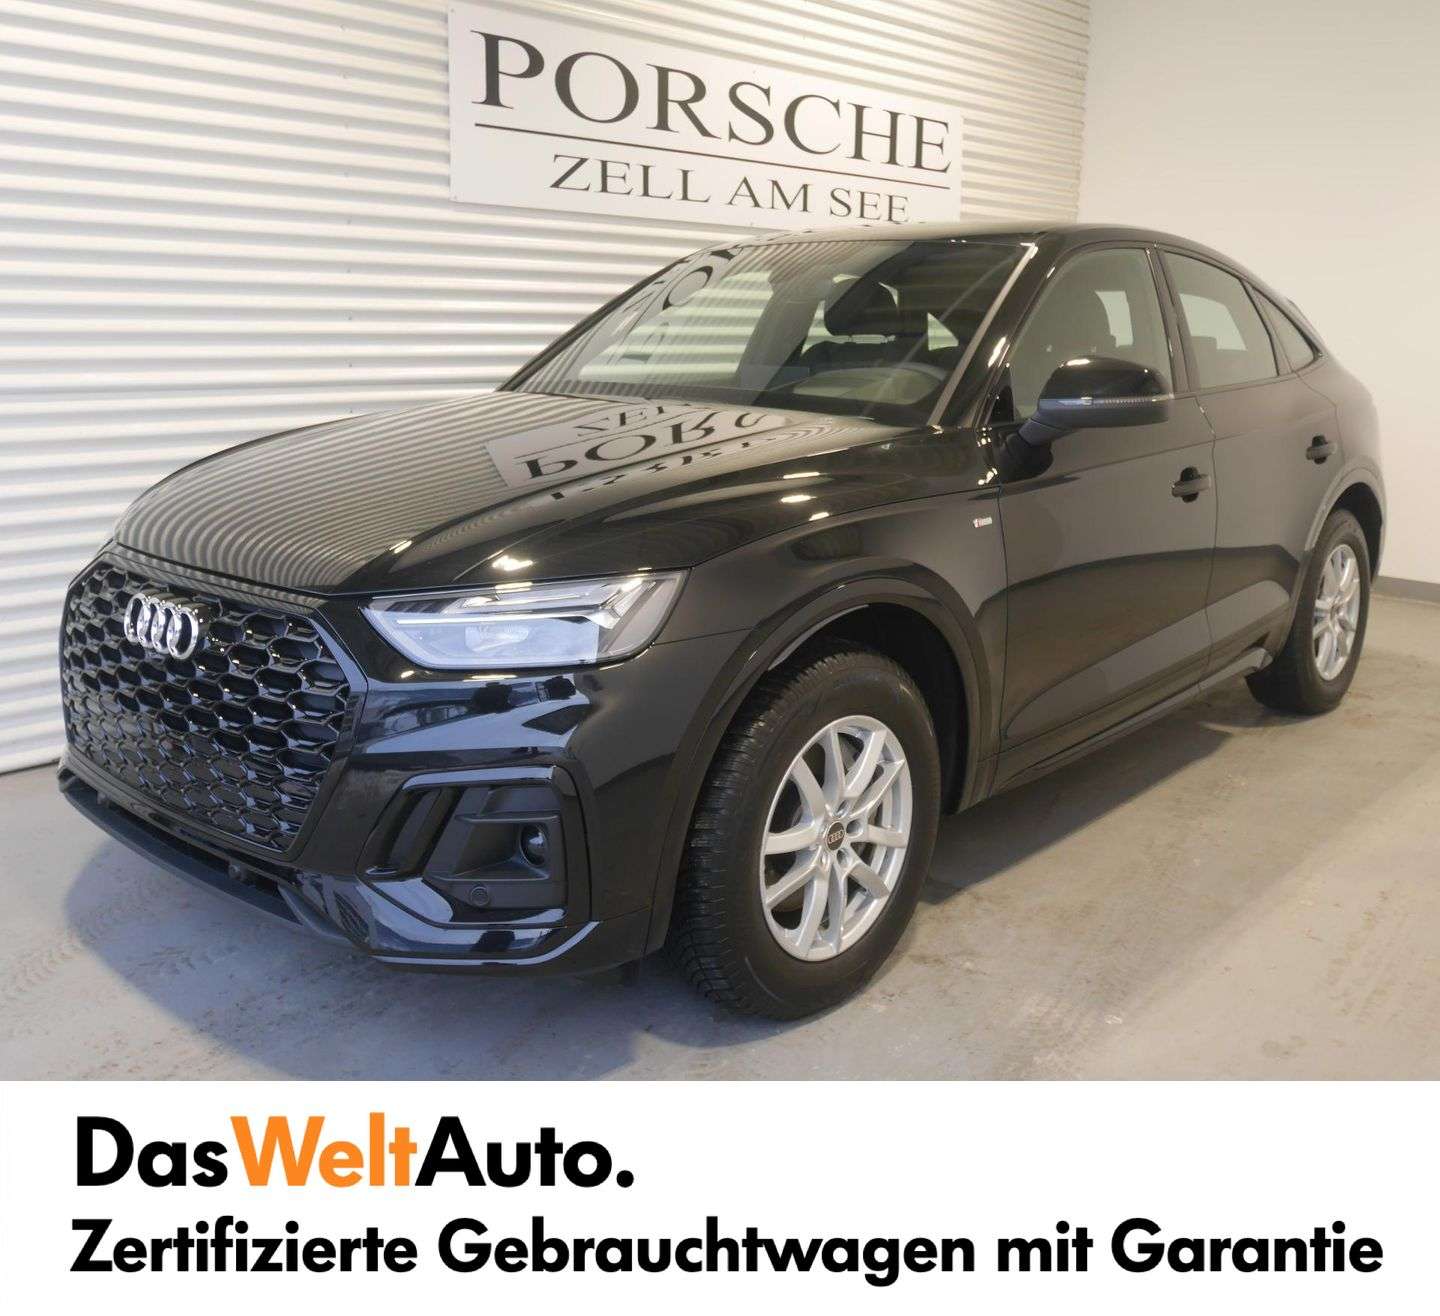 Audi Q5 Off-Road/Pick-up in Black used in Zell am See for € 74,890.-